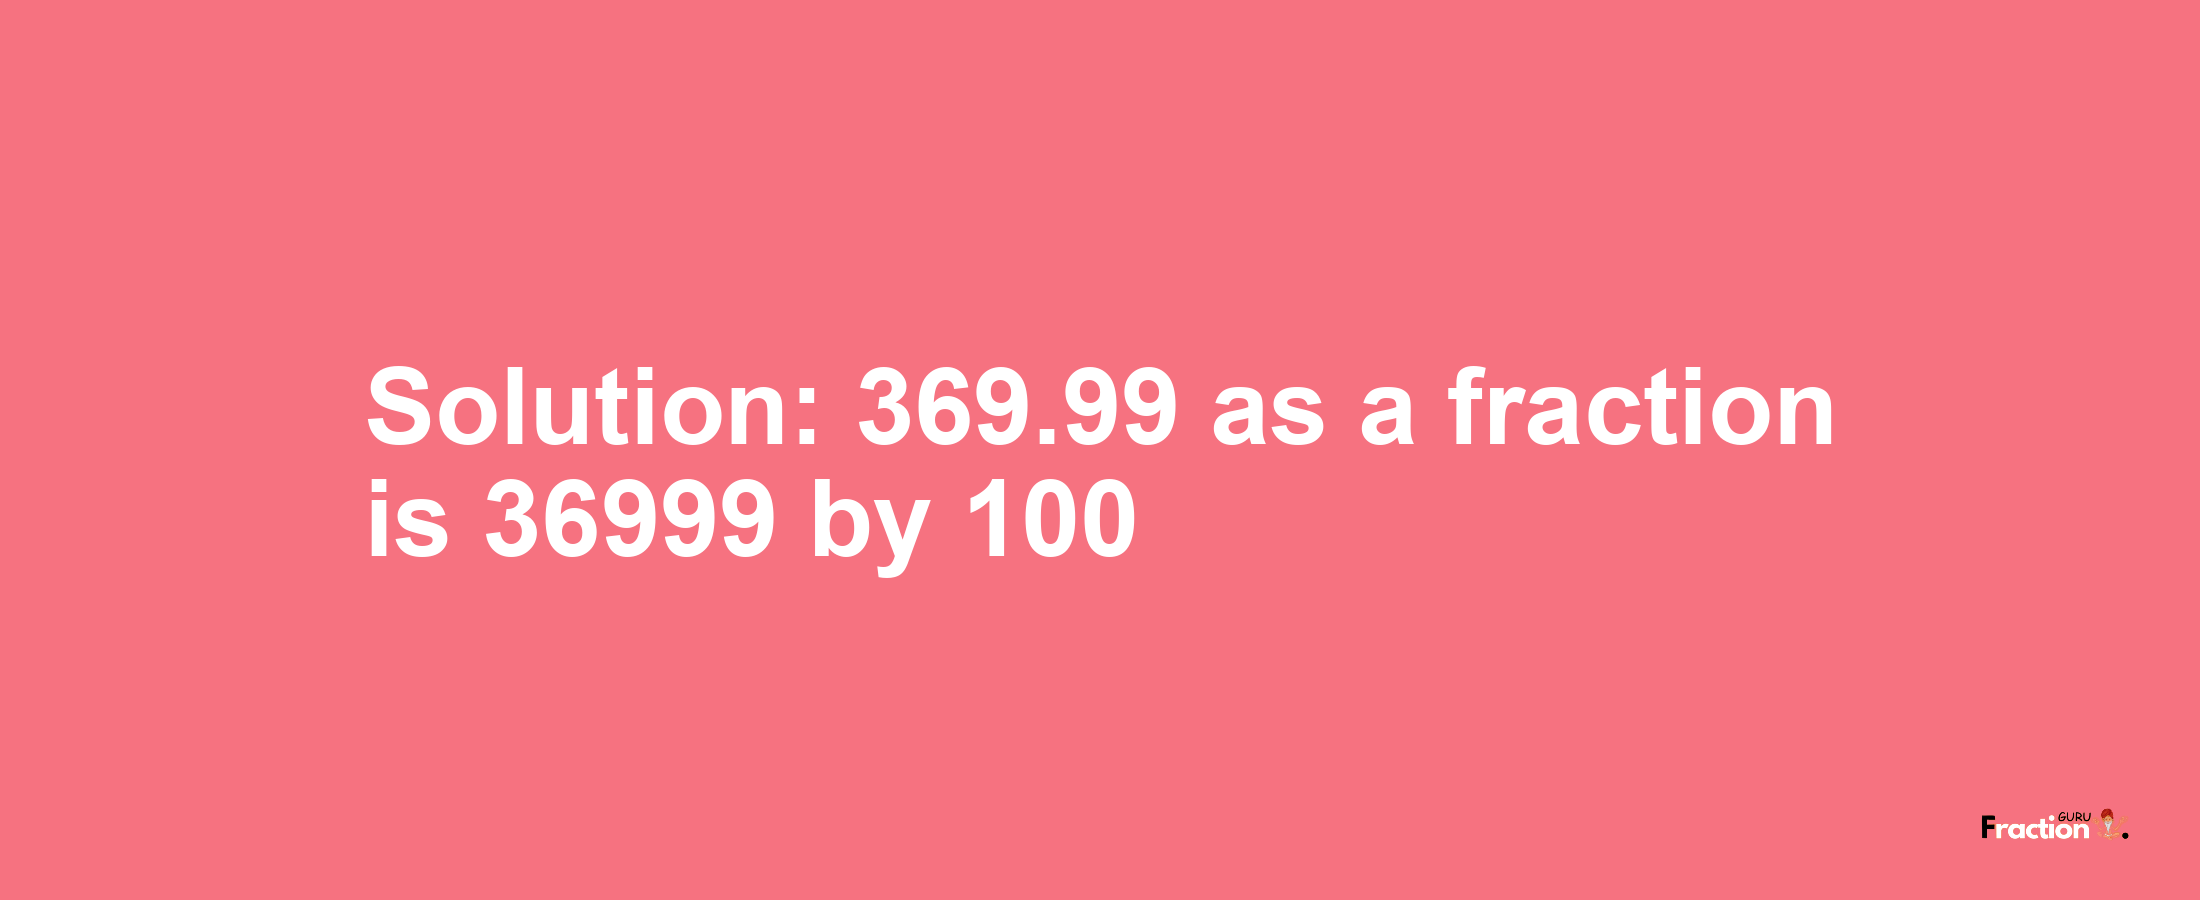 Solution:369.99 as a fraction is 36999/100